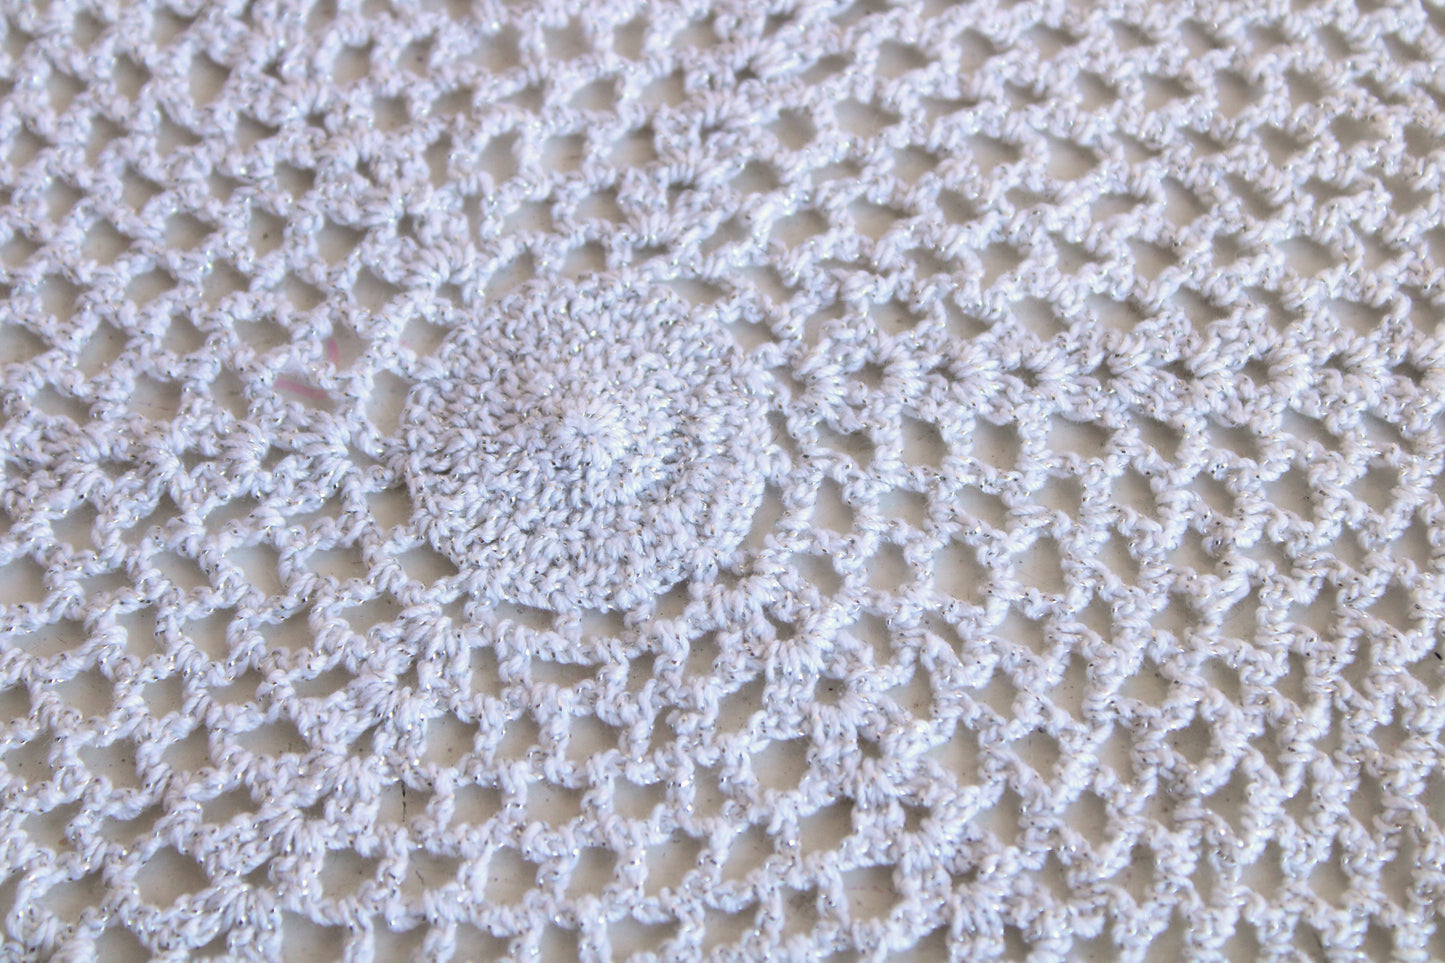 Vintage Doily with Silver Threads